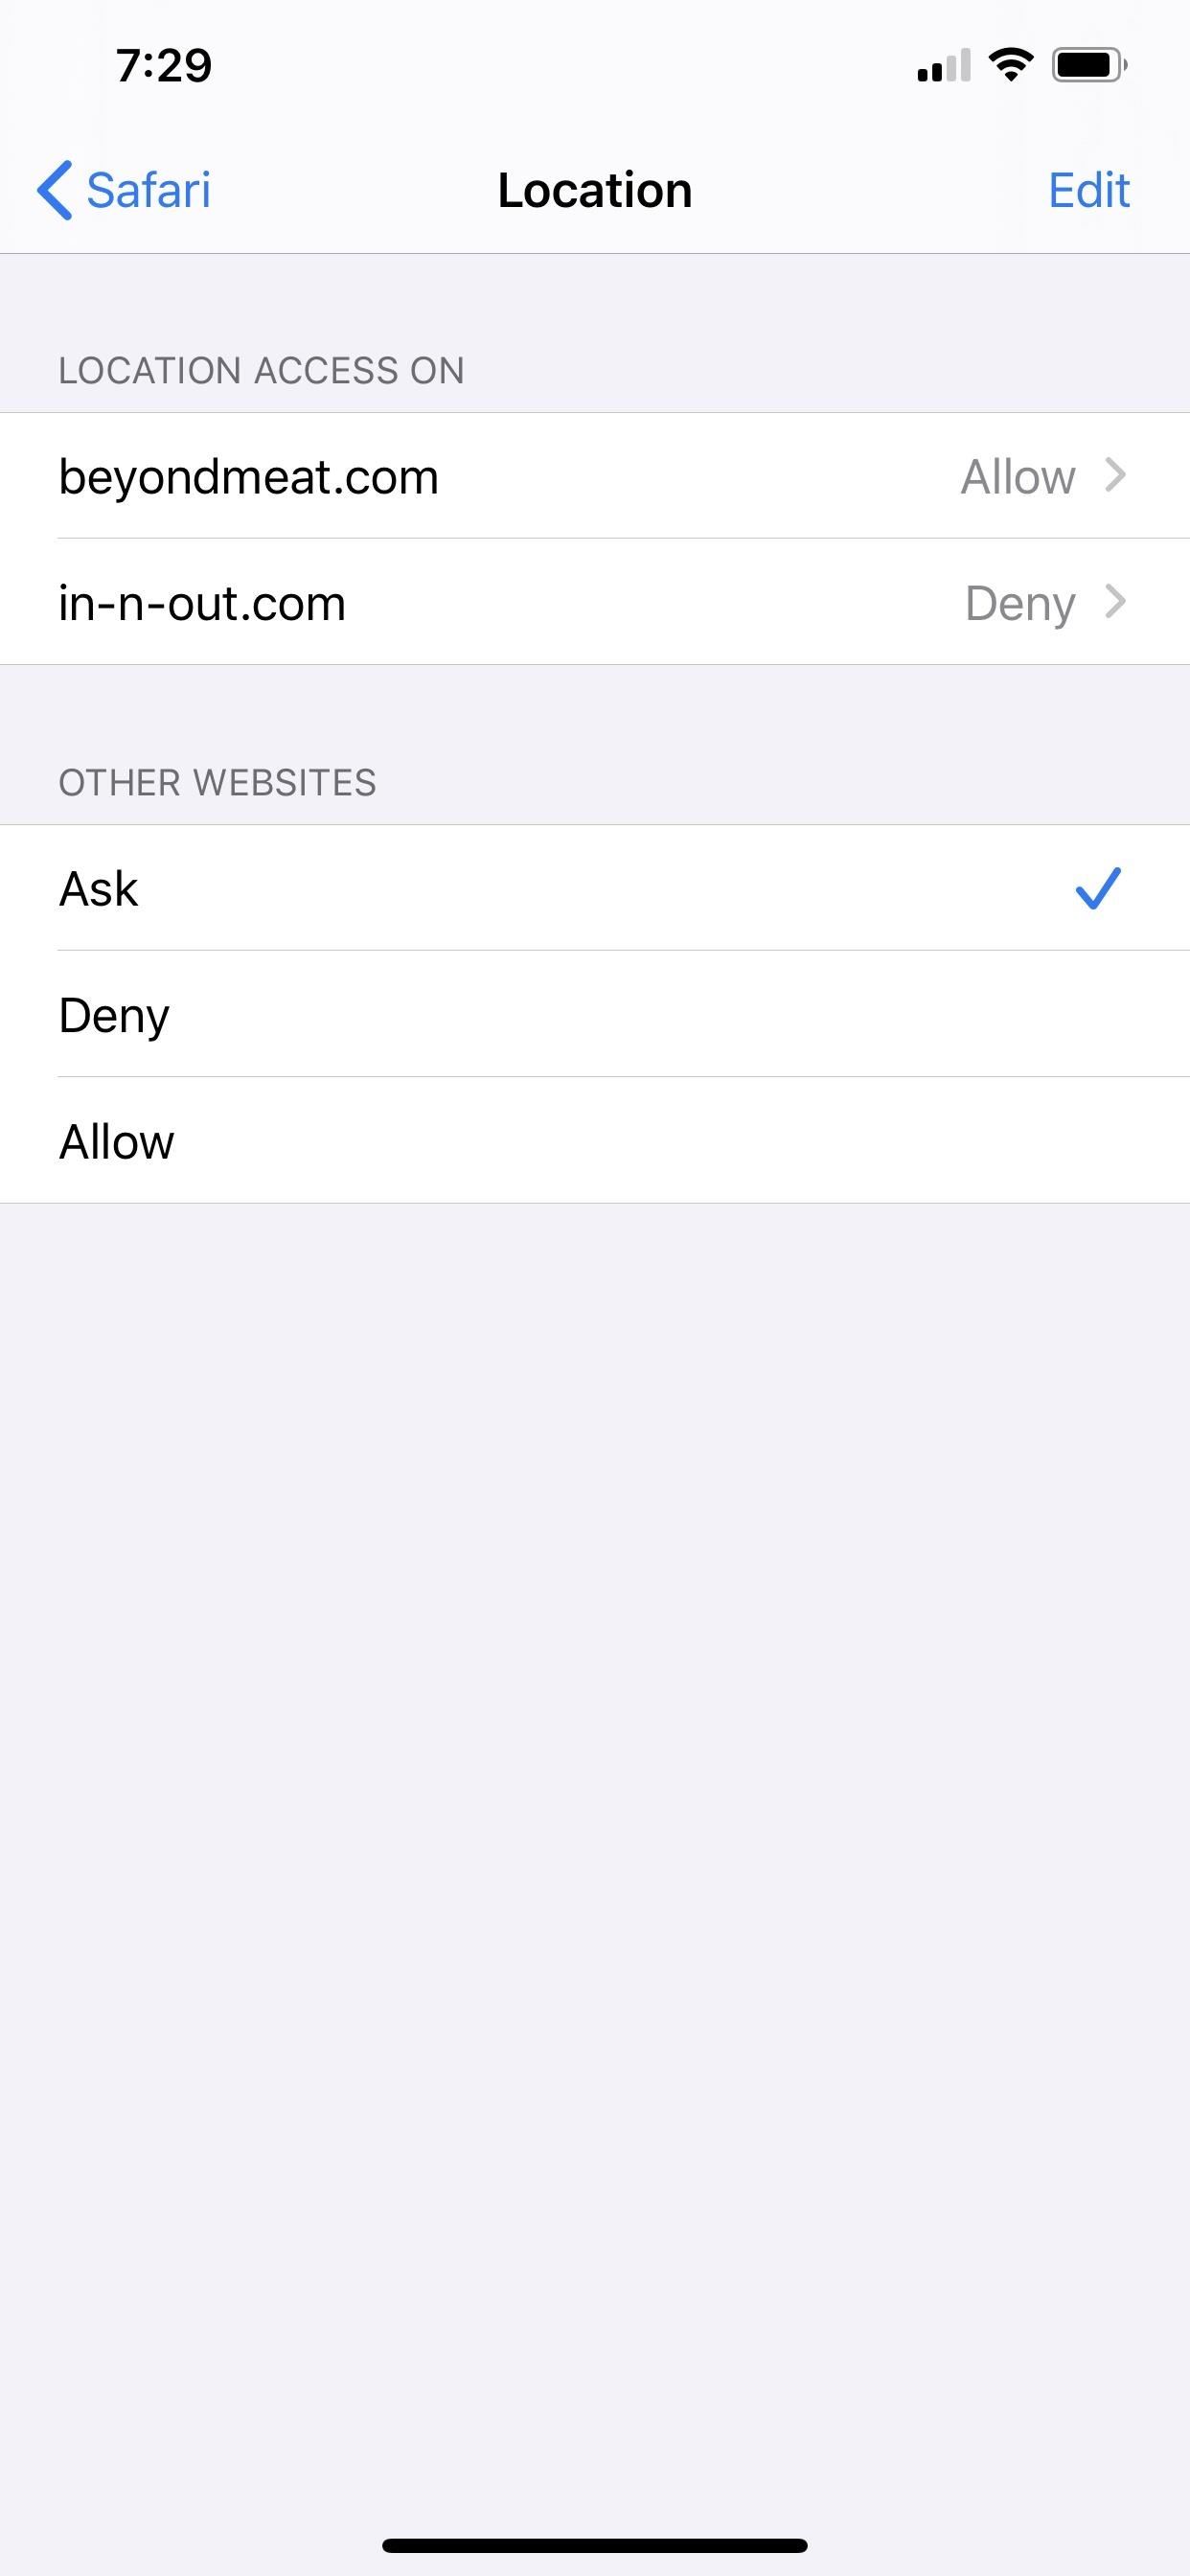 How to Customize Camera, Microphone & Location Permissions for Specific Websites in iOS 13's Safari